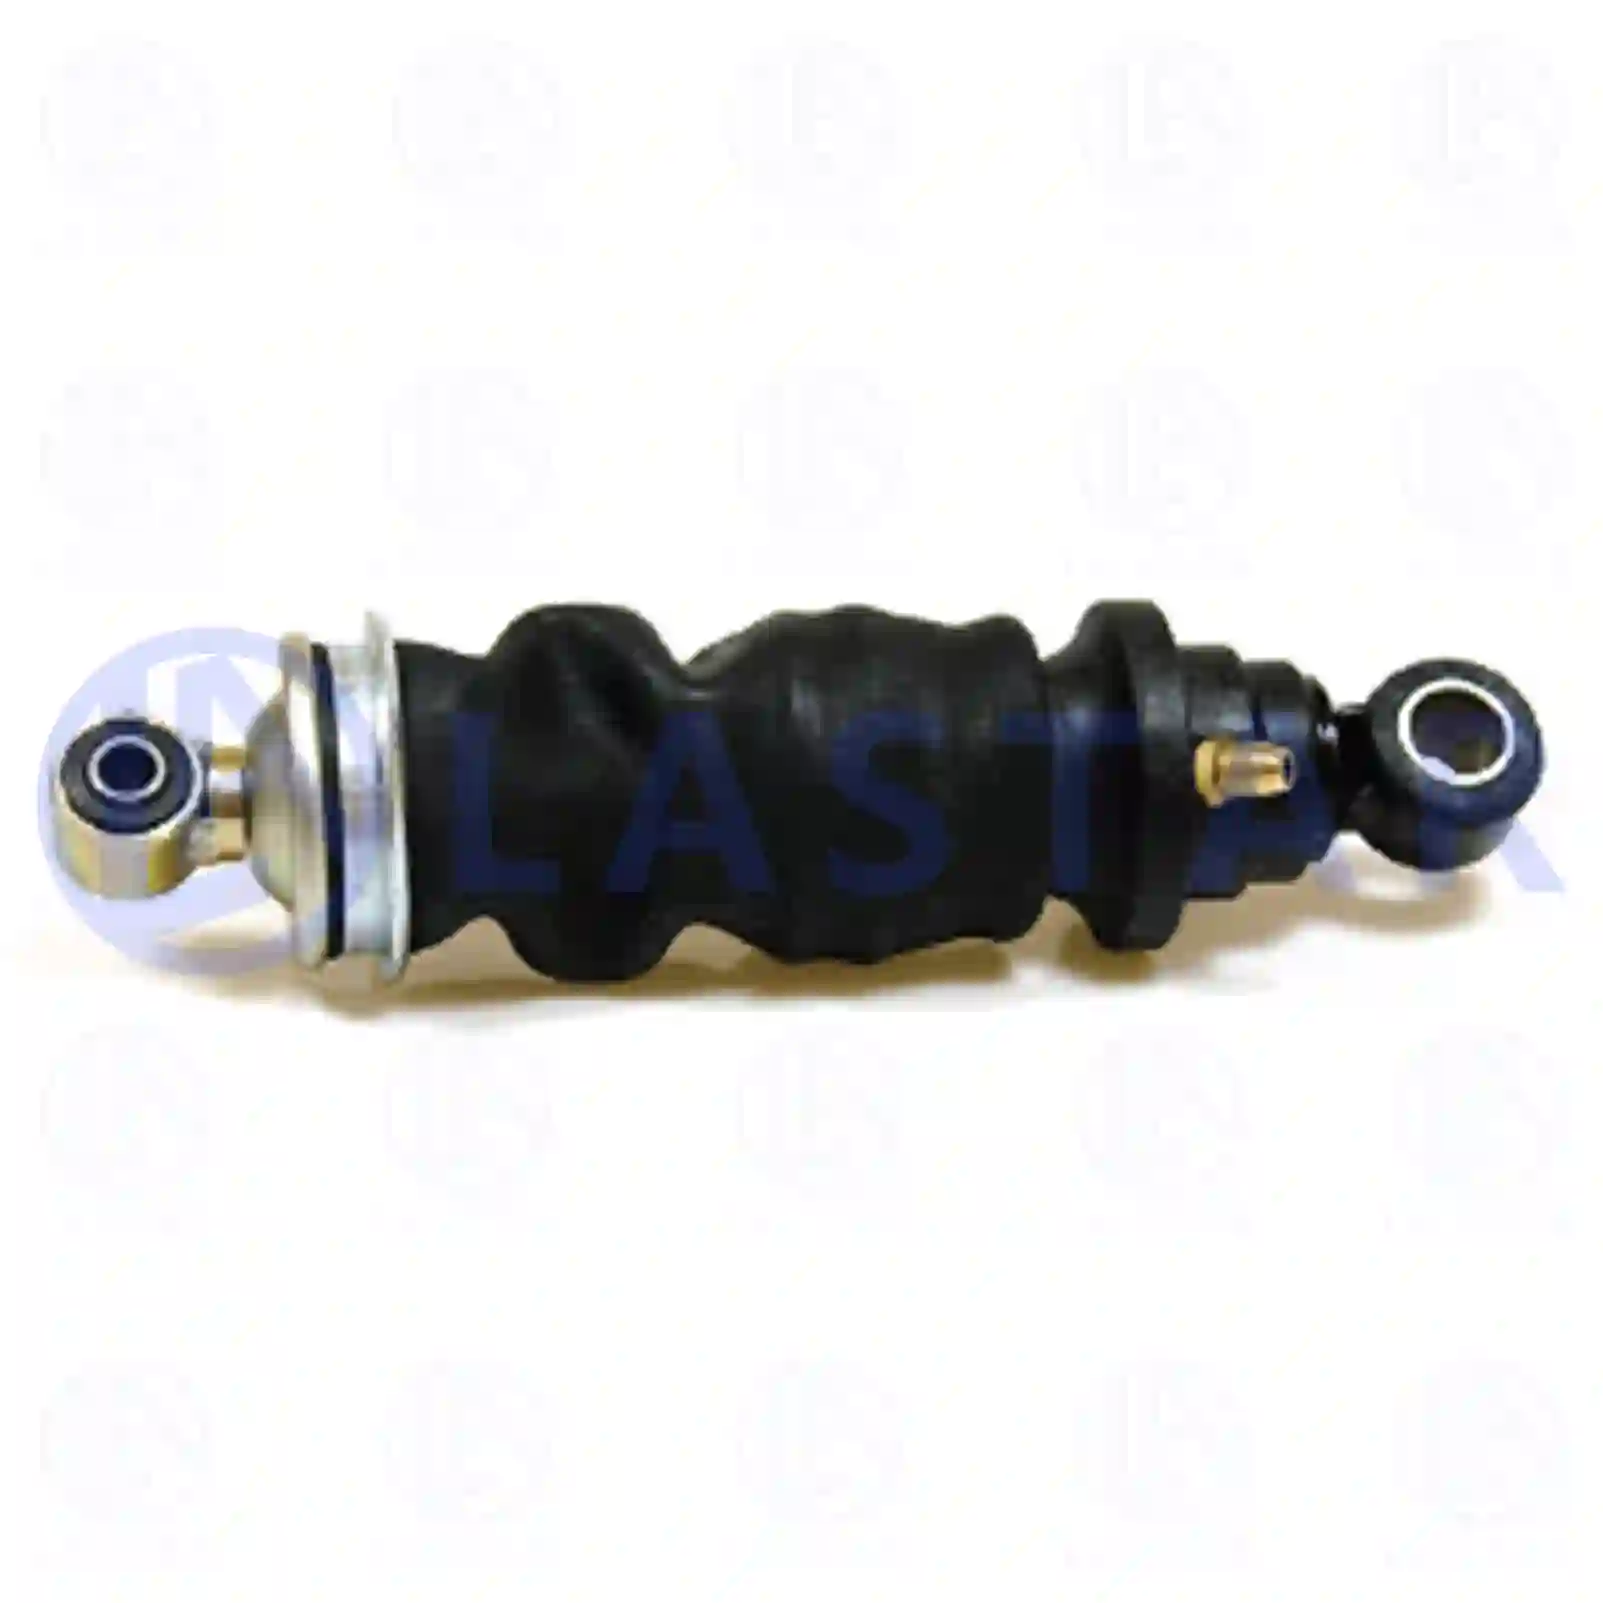 Cabin shock absorber, with air bellow, 77734860, 9428900119, 9428902919, 9428906919, ||  77734860 Lastar Spare Part | Truck Spare Parts, Auotomotive Spare Parts Cabin shock absorber, with air bellow, 77734860, 9428900119, 9428902919, 9428906919, ||  77734860 Lastar Spare Part | Truck Spare Parts, Auotomotive Spare Parts